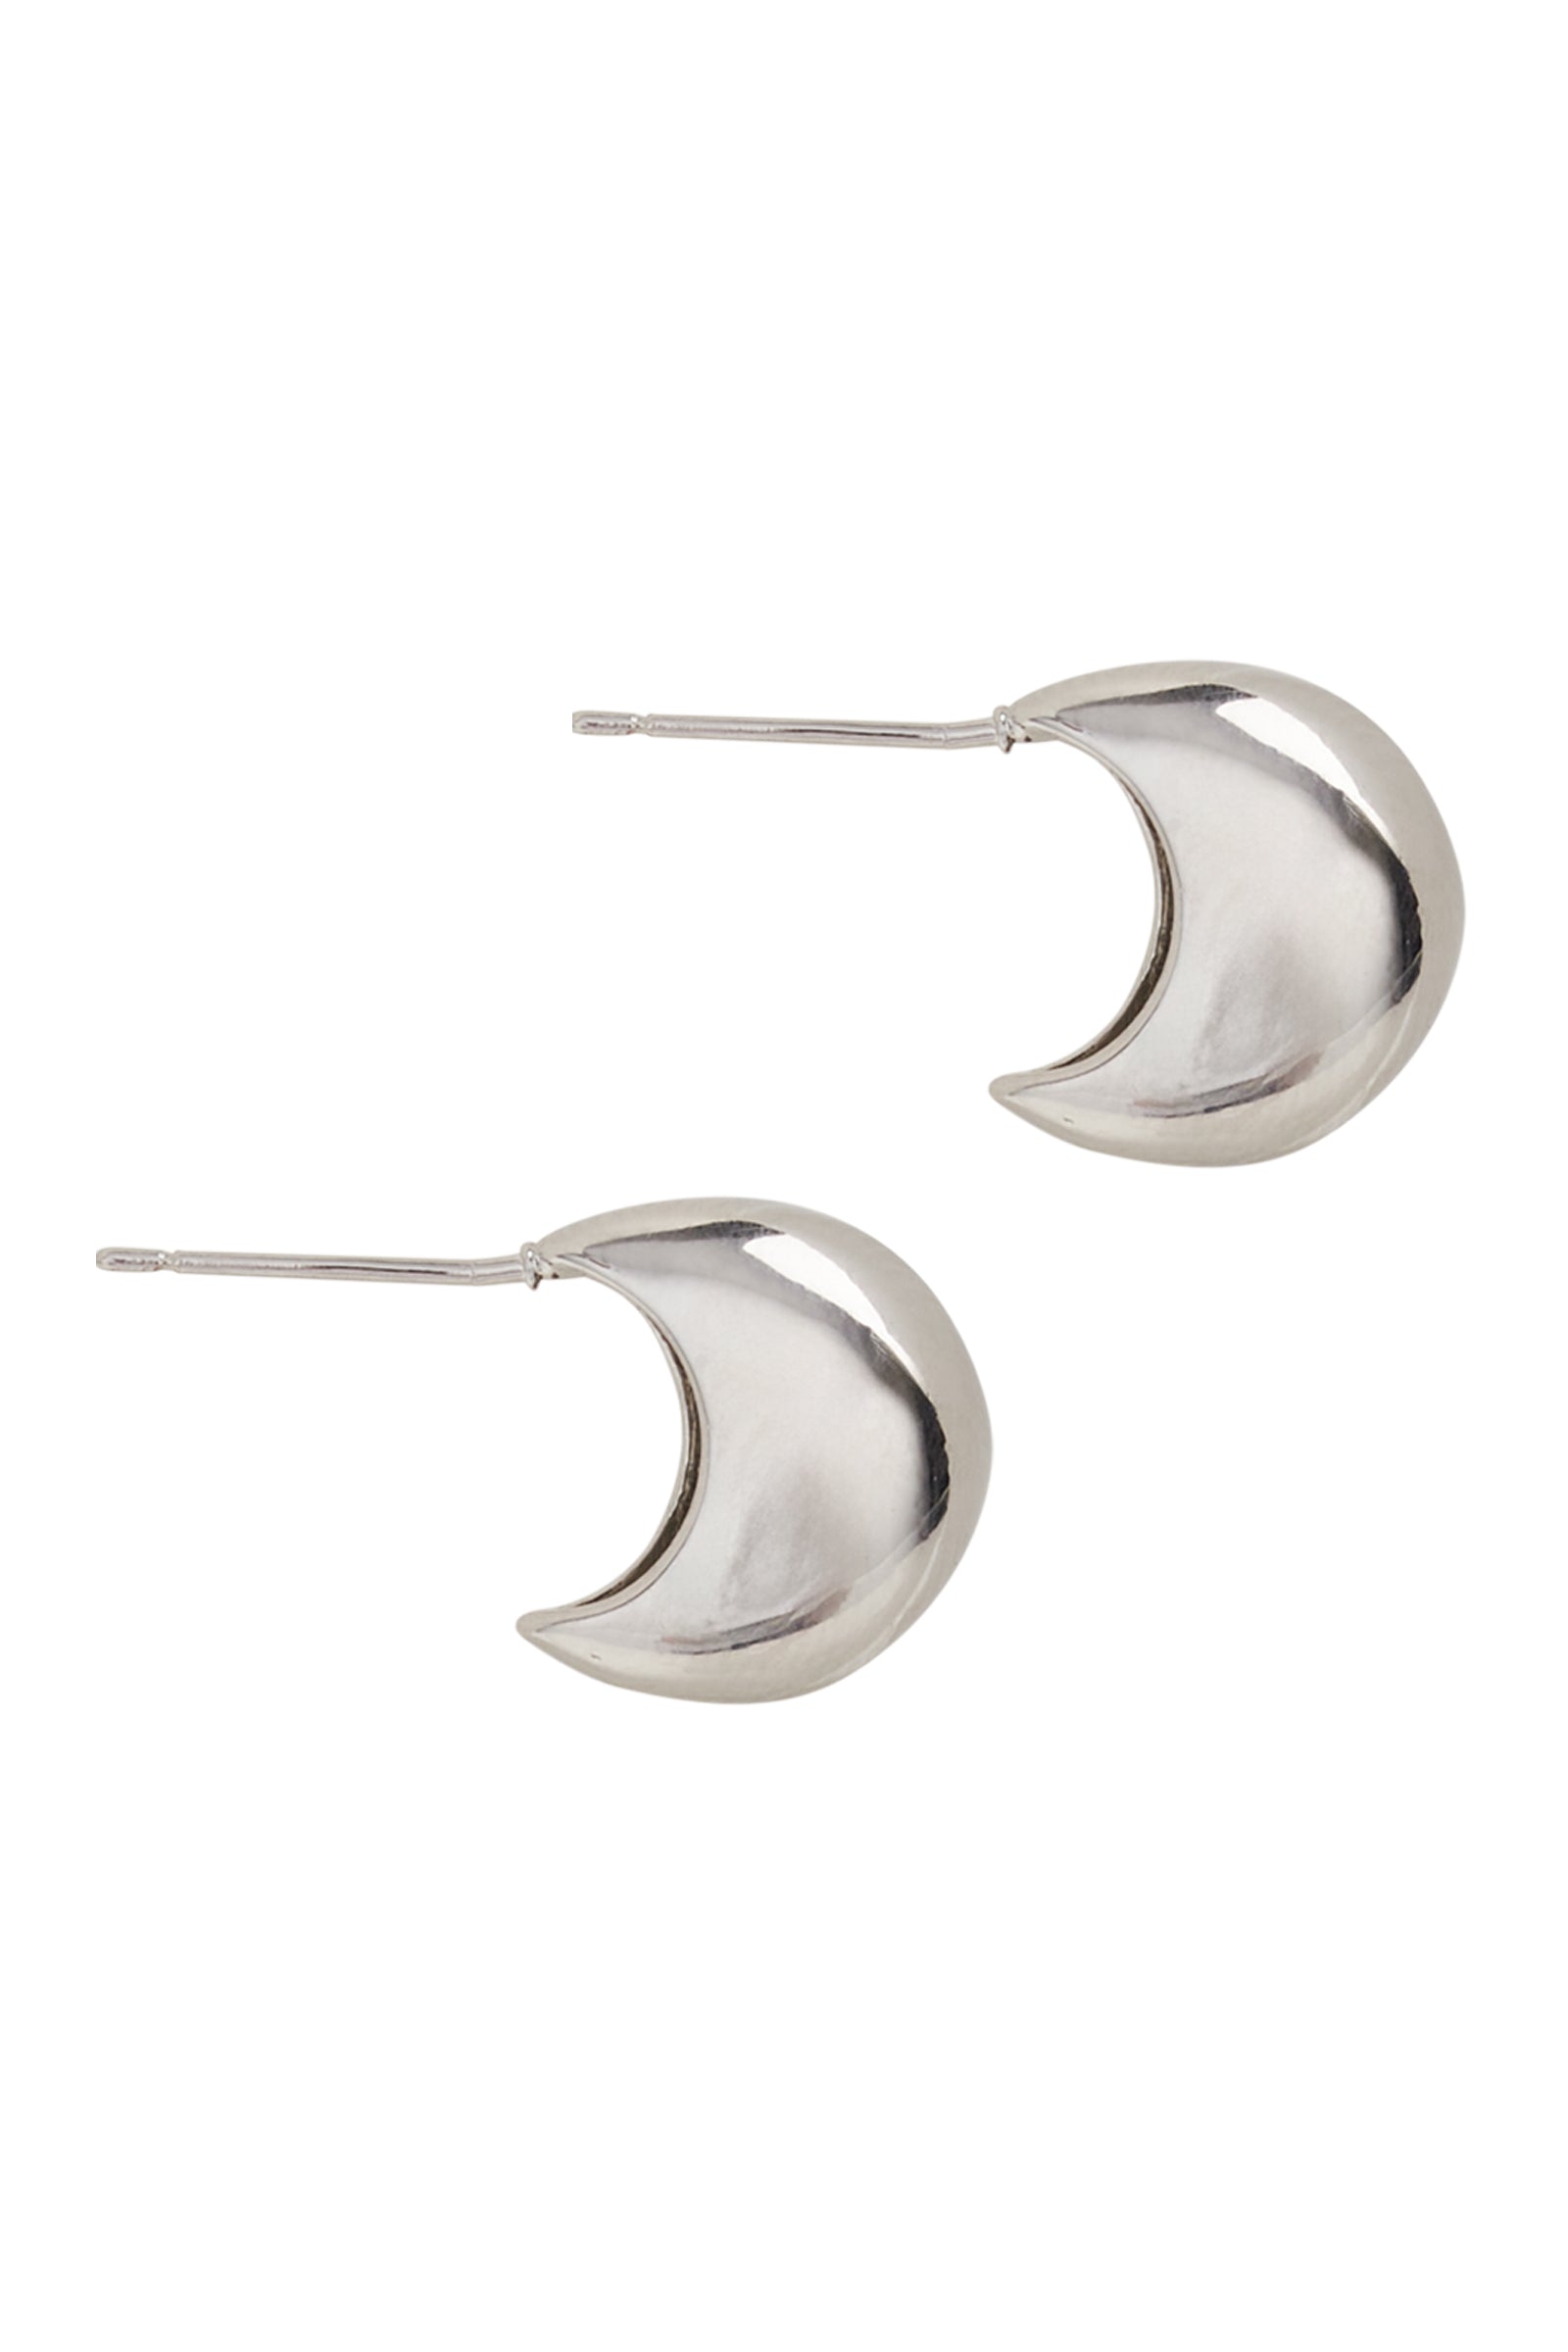 Heritage Earring - Silver Dome - eb&ive Earring